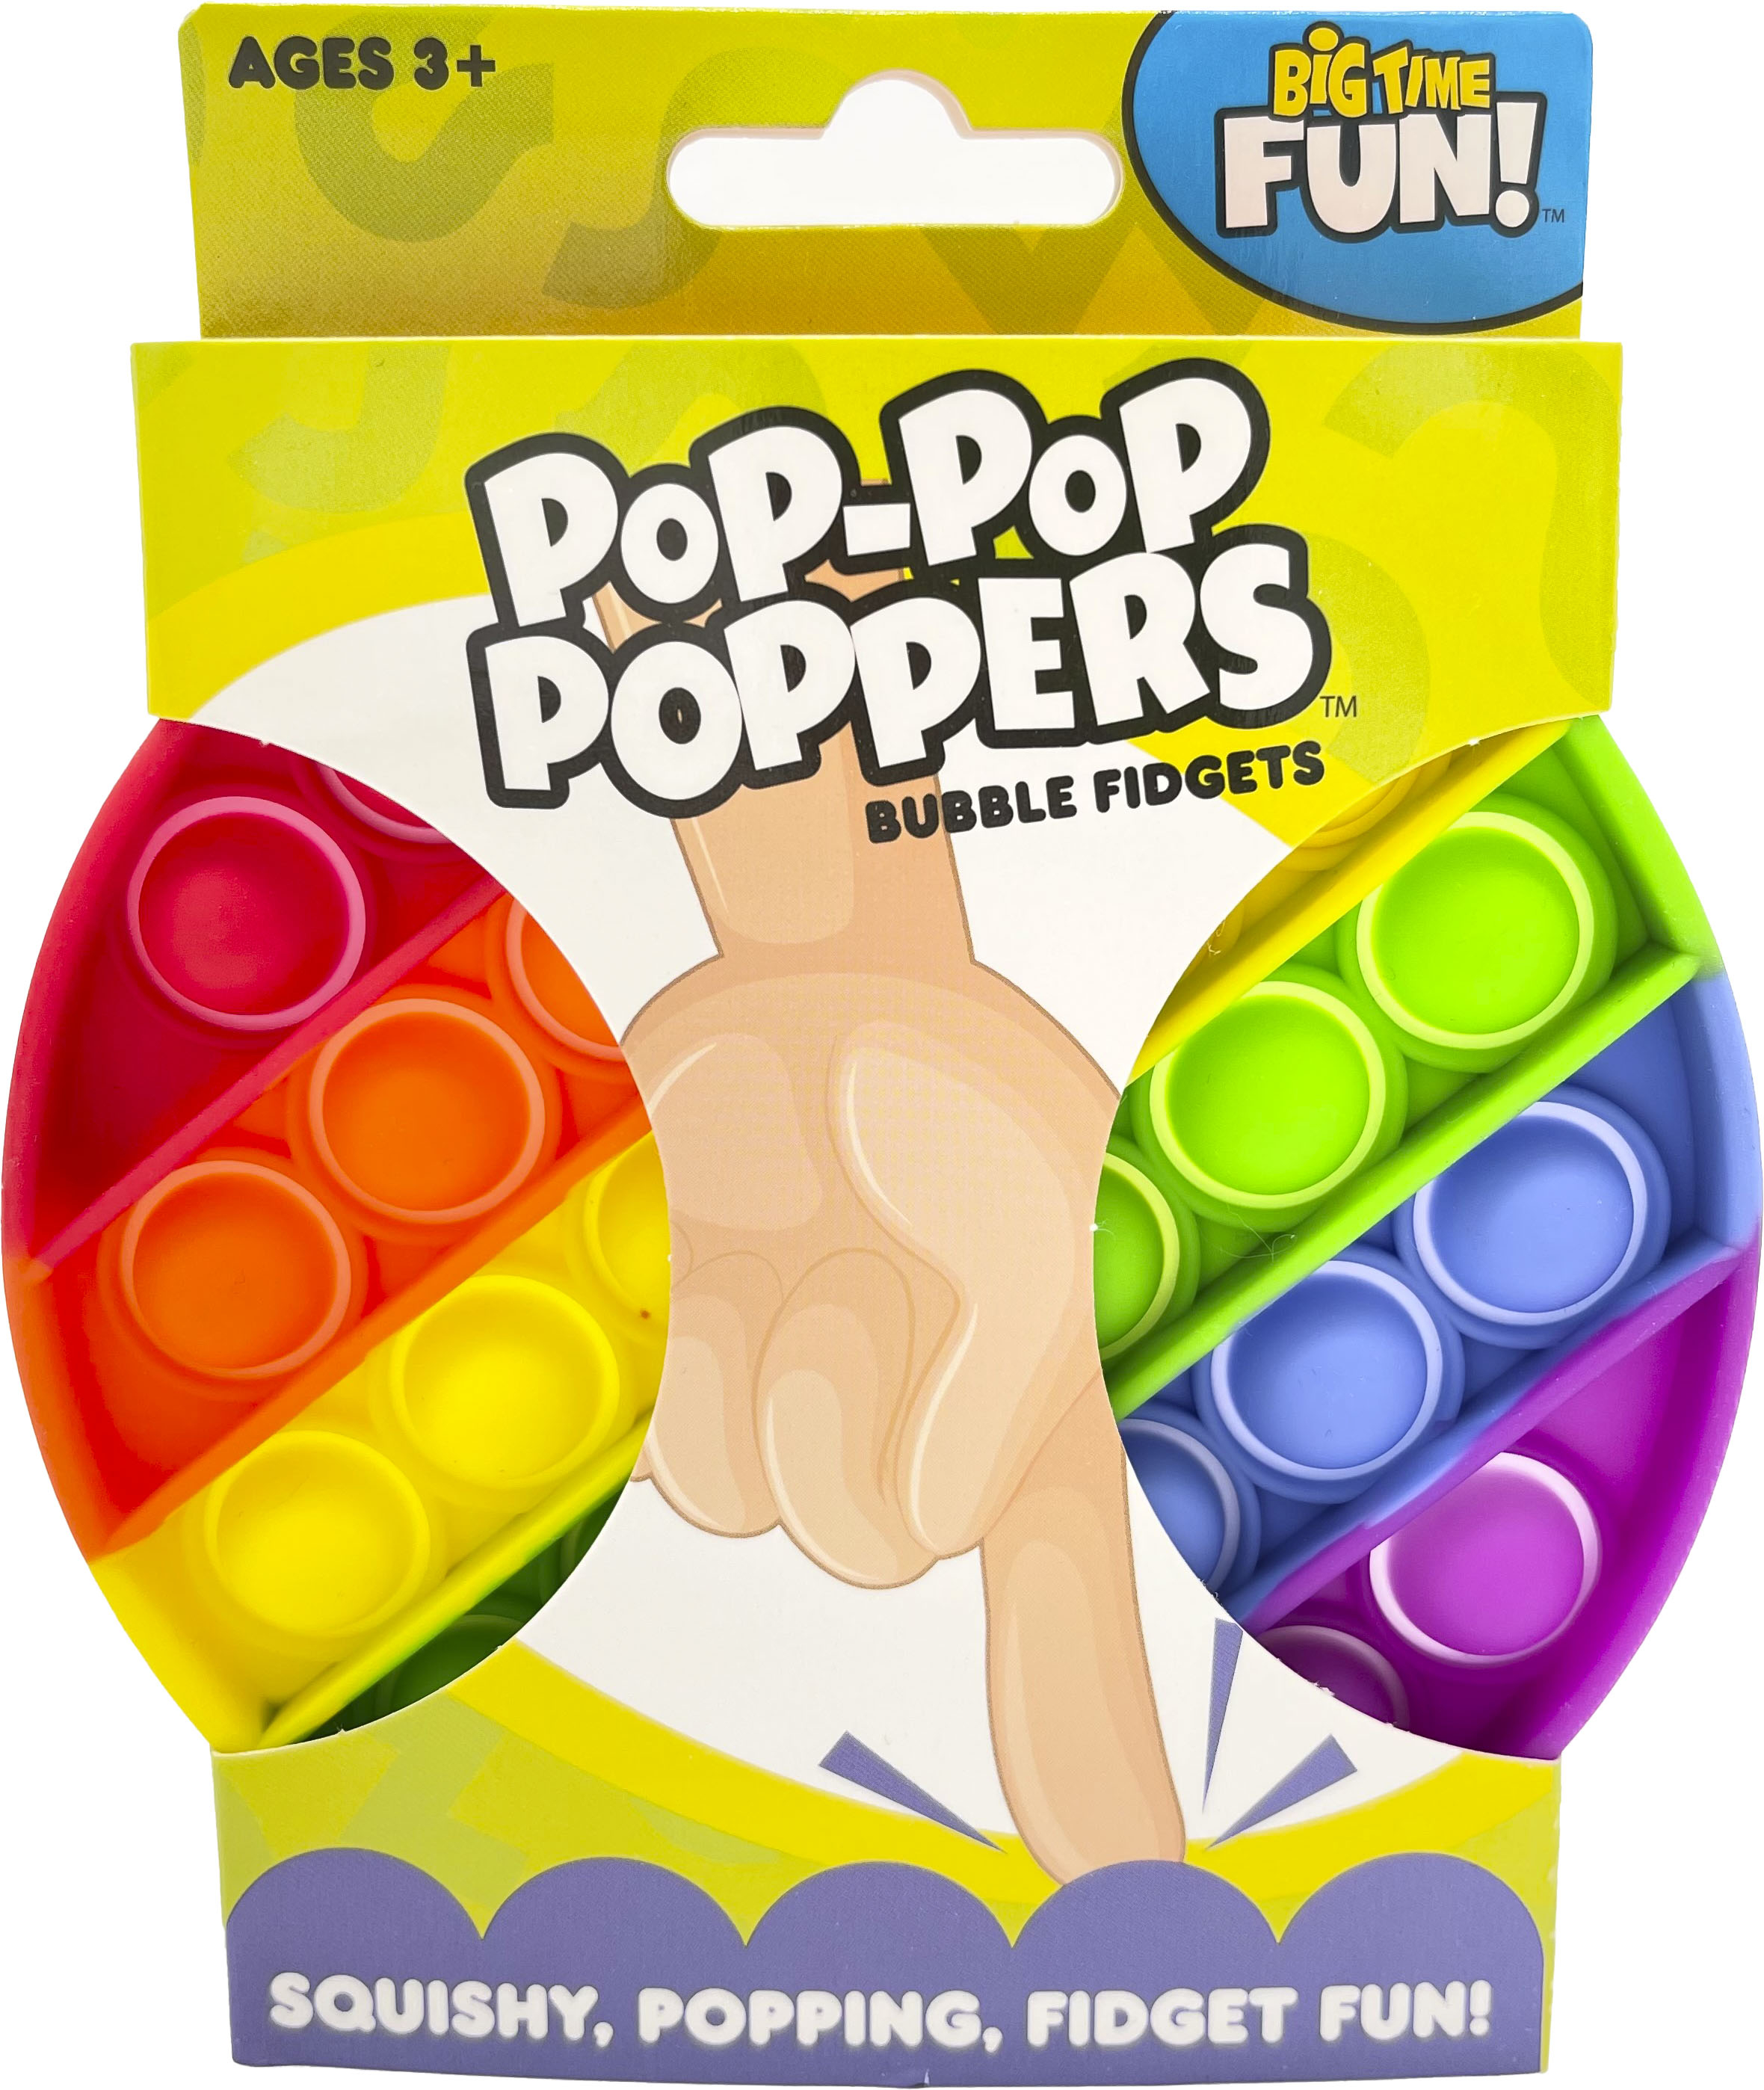 Big Time Toys - Pop-Pop Poppers